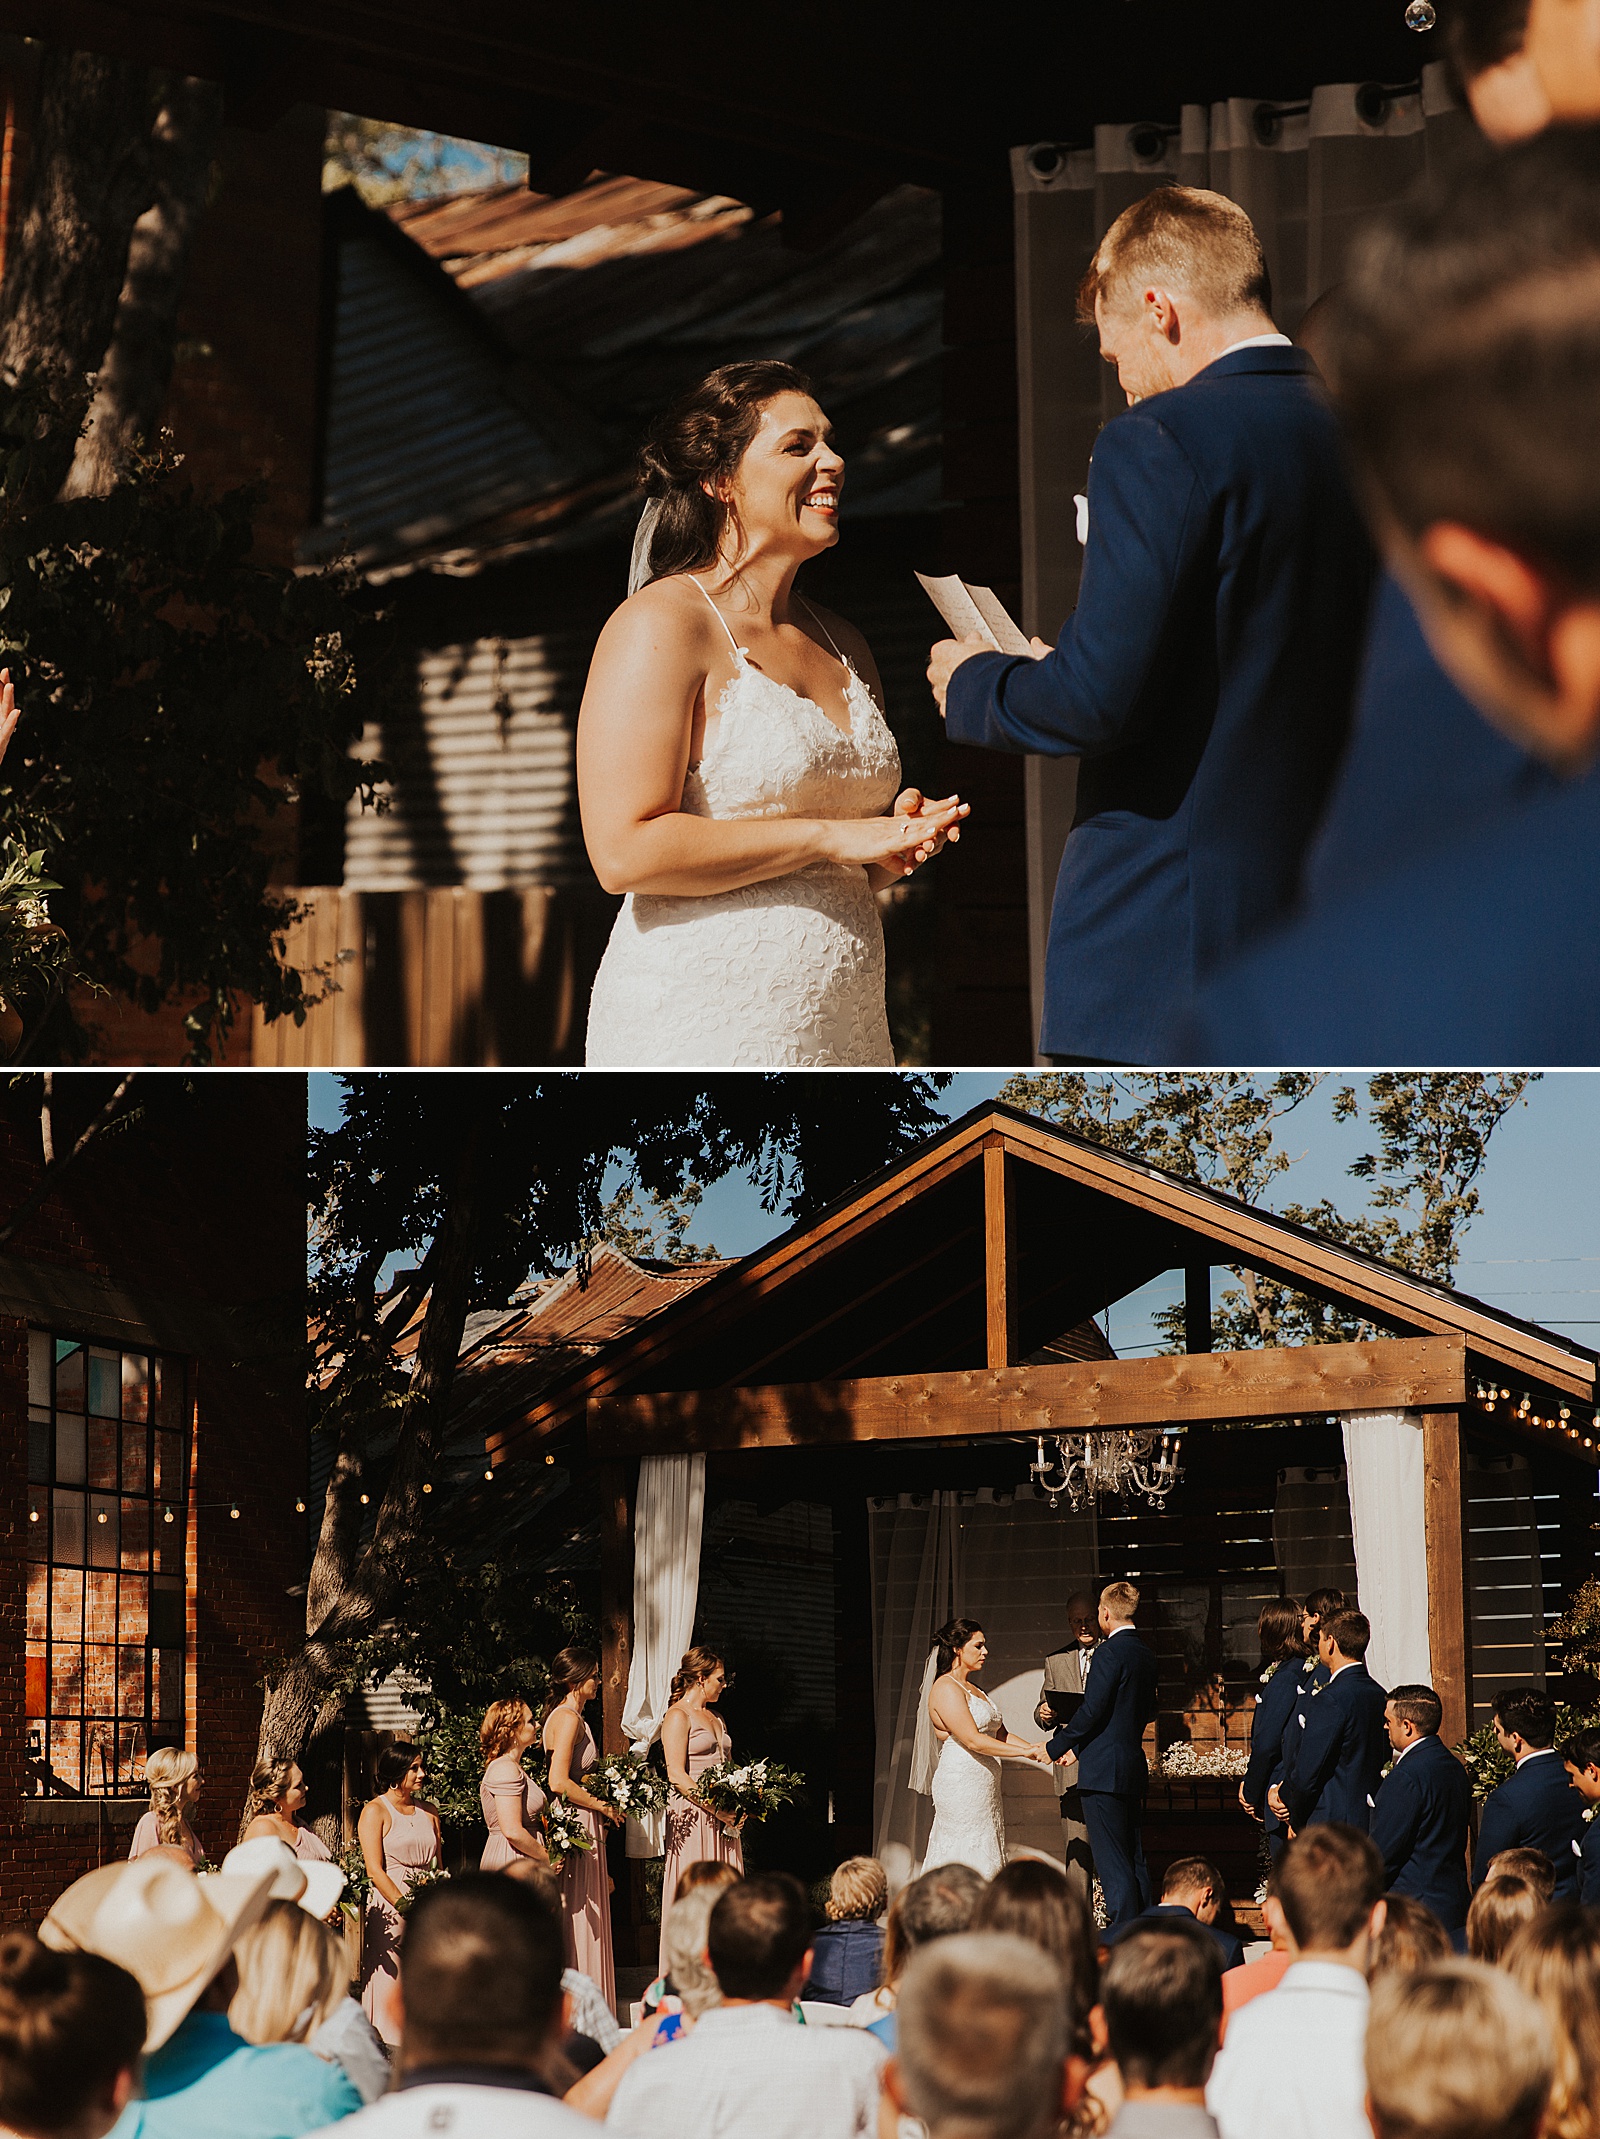 An outdoor ceremony wedding photo at the Soda District Courtyard in Abilene.